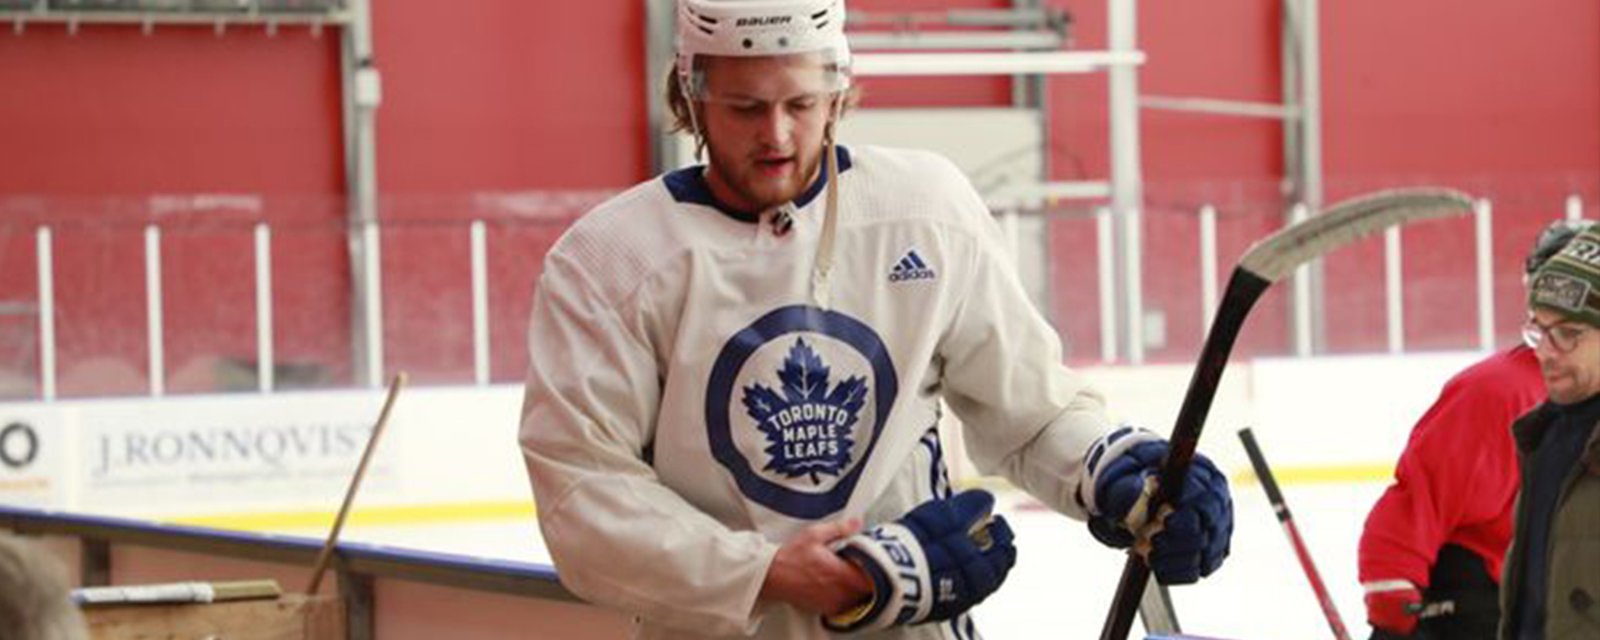 Report: Nylander on negotiations: “I have to take care of myself”